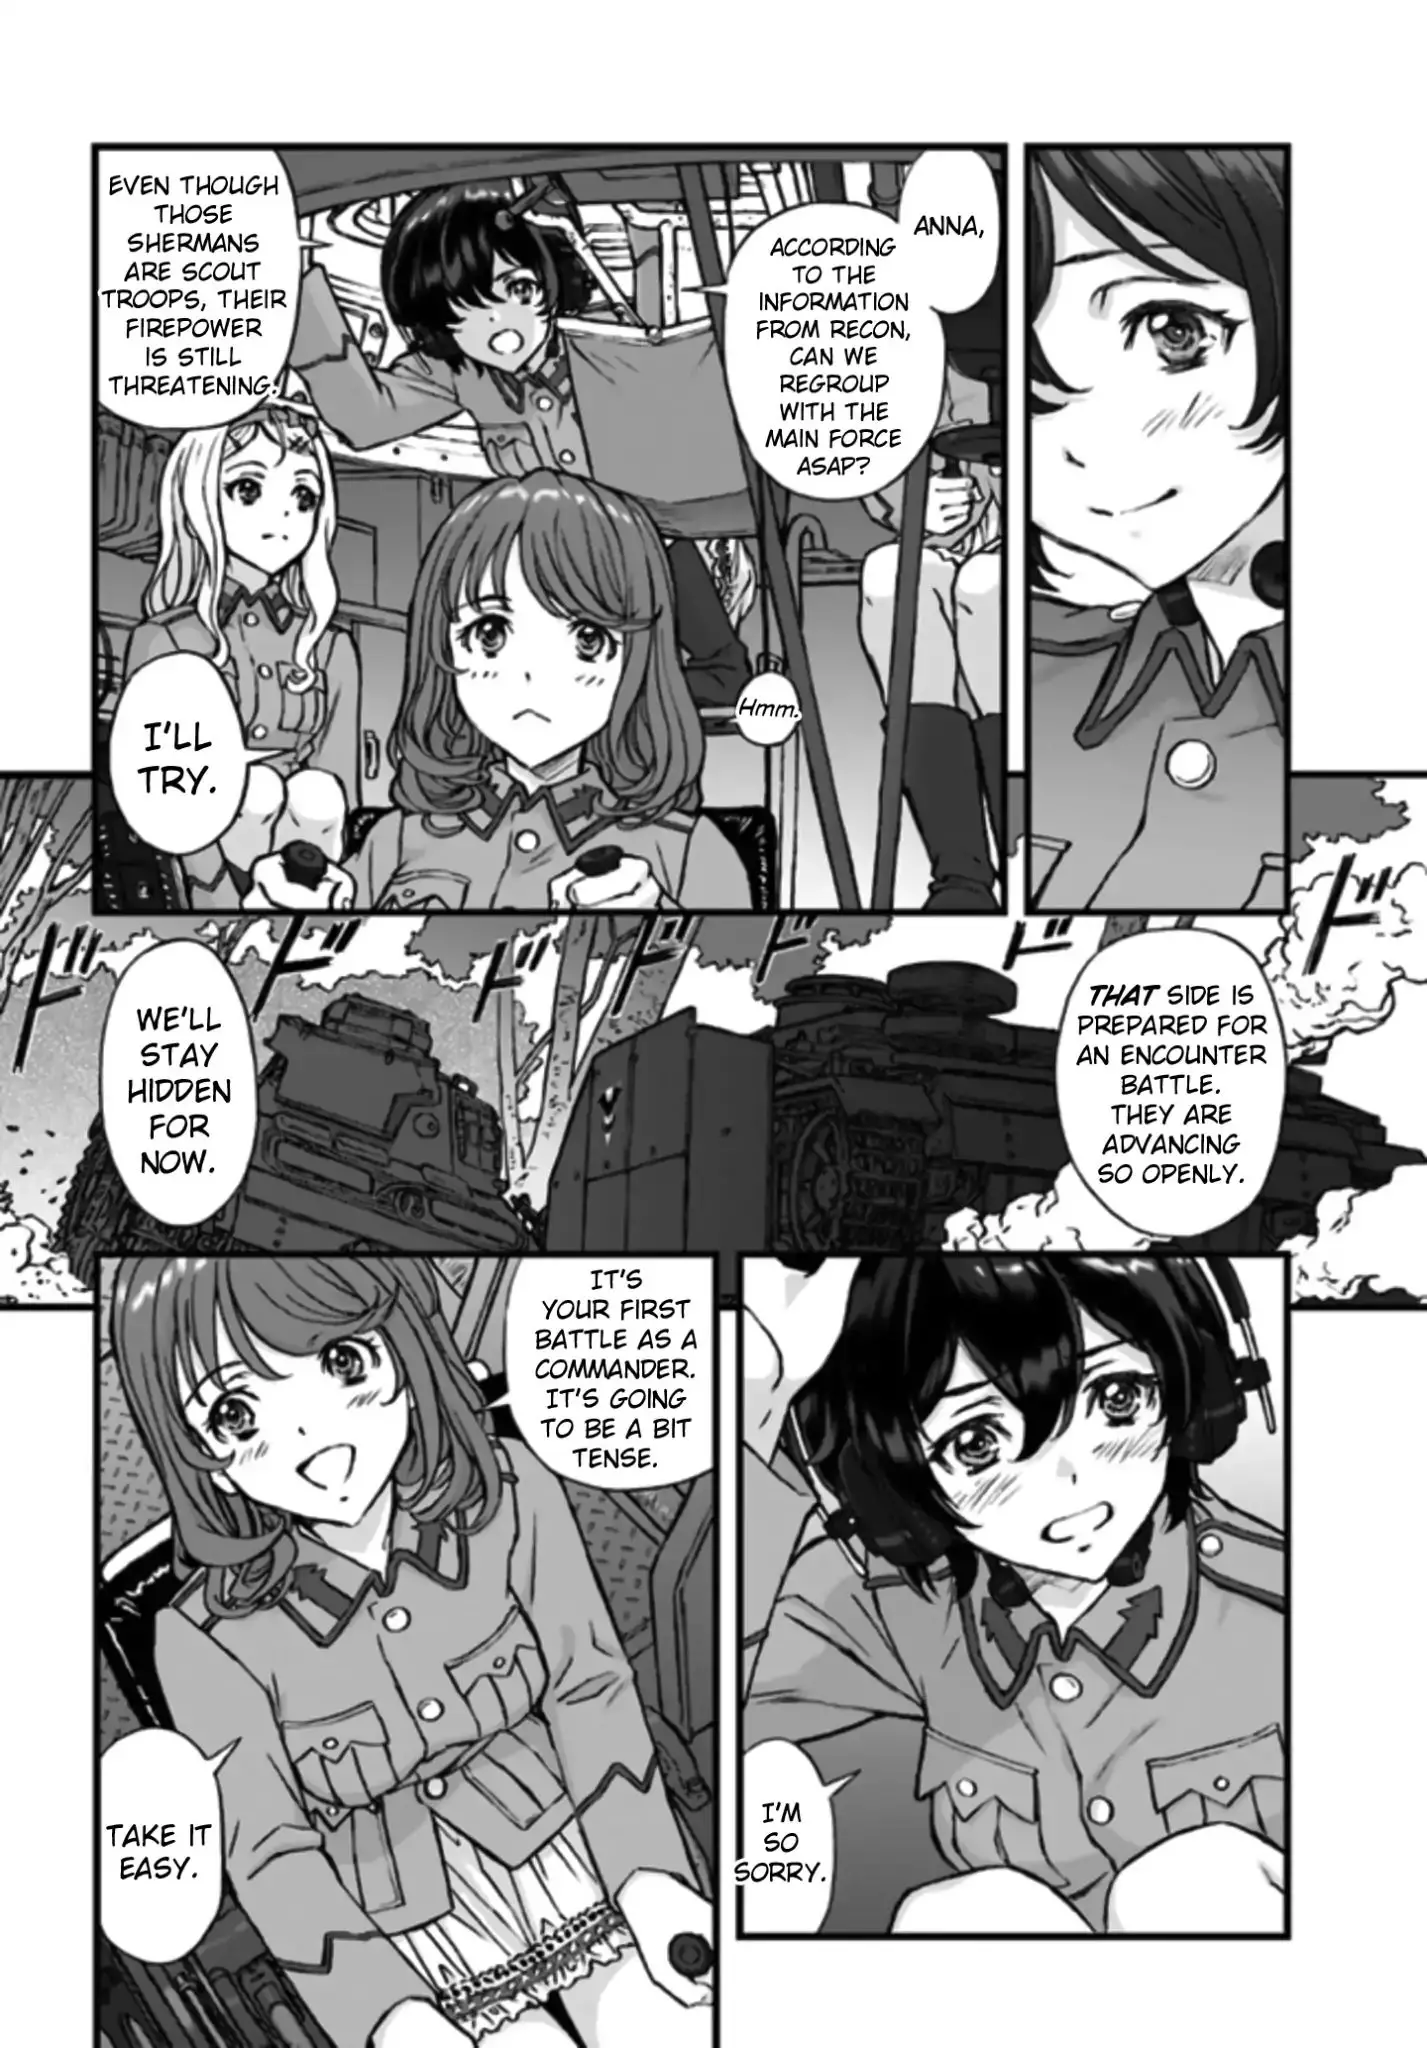 Girls Und Panzer - The Fir Tree And The Iron-Winged Witch - 1 page 13